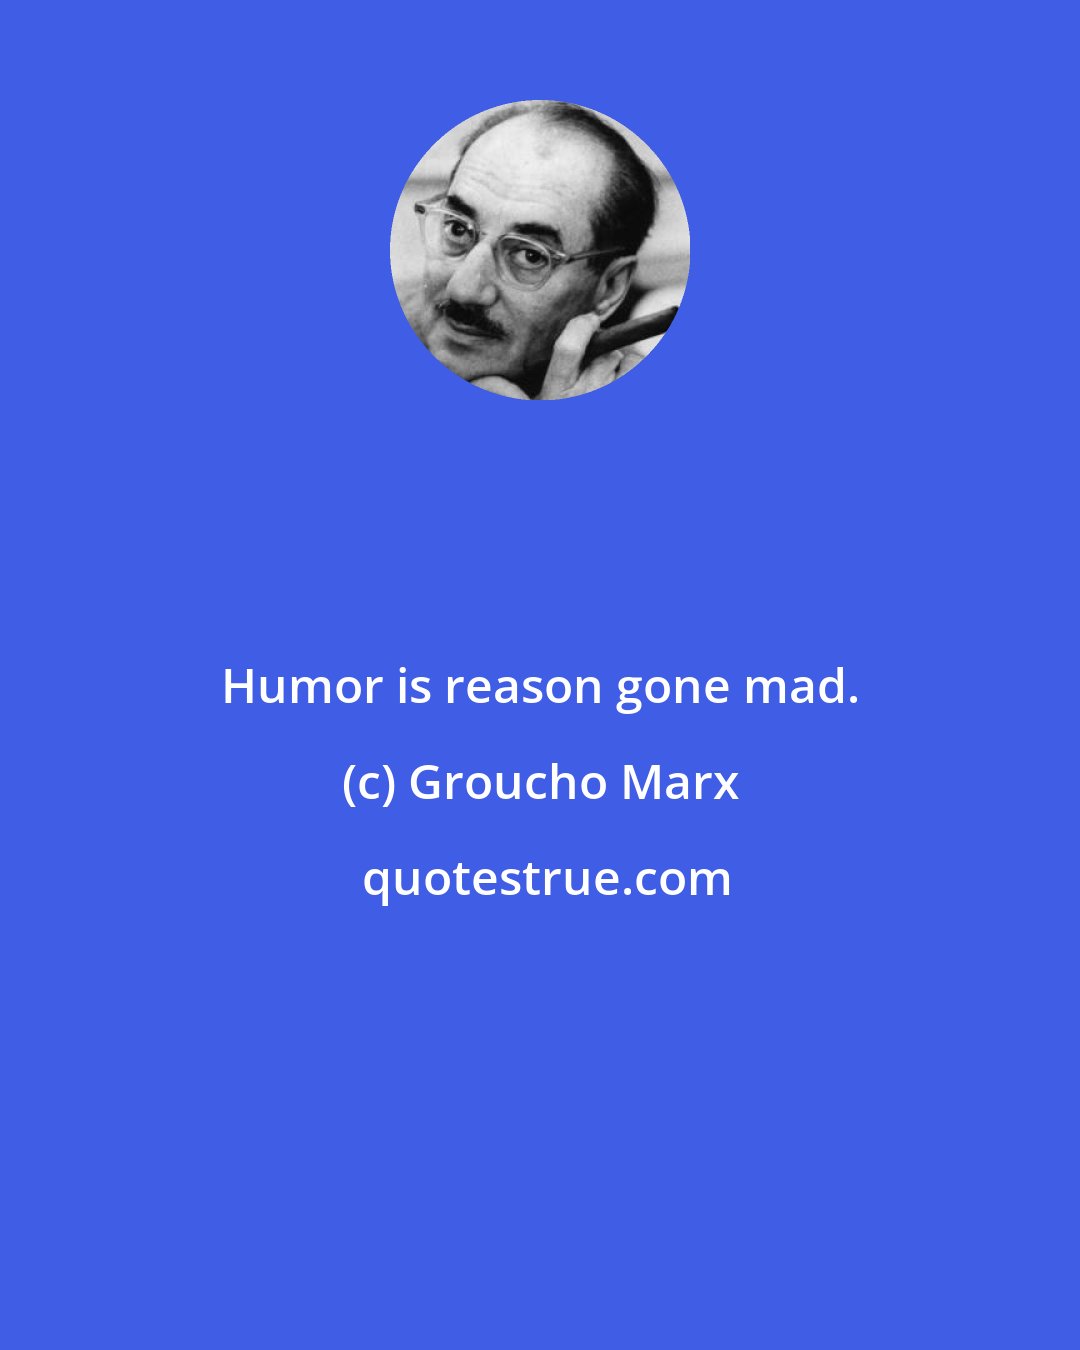 Groucho Marx: Humor is reason gone mad.